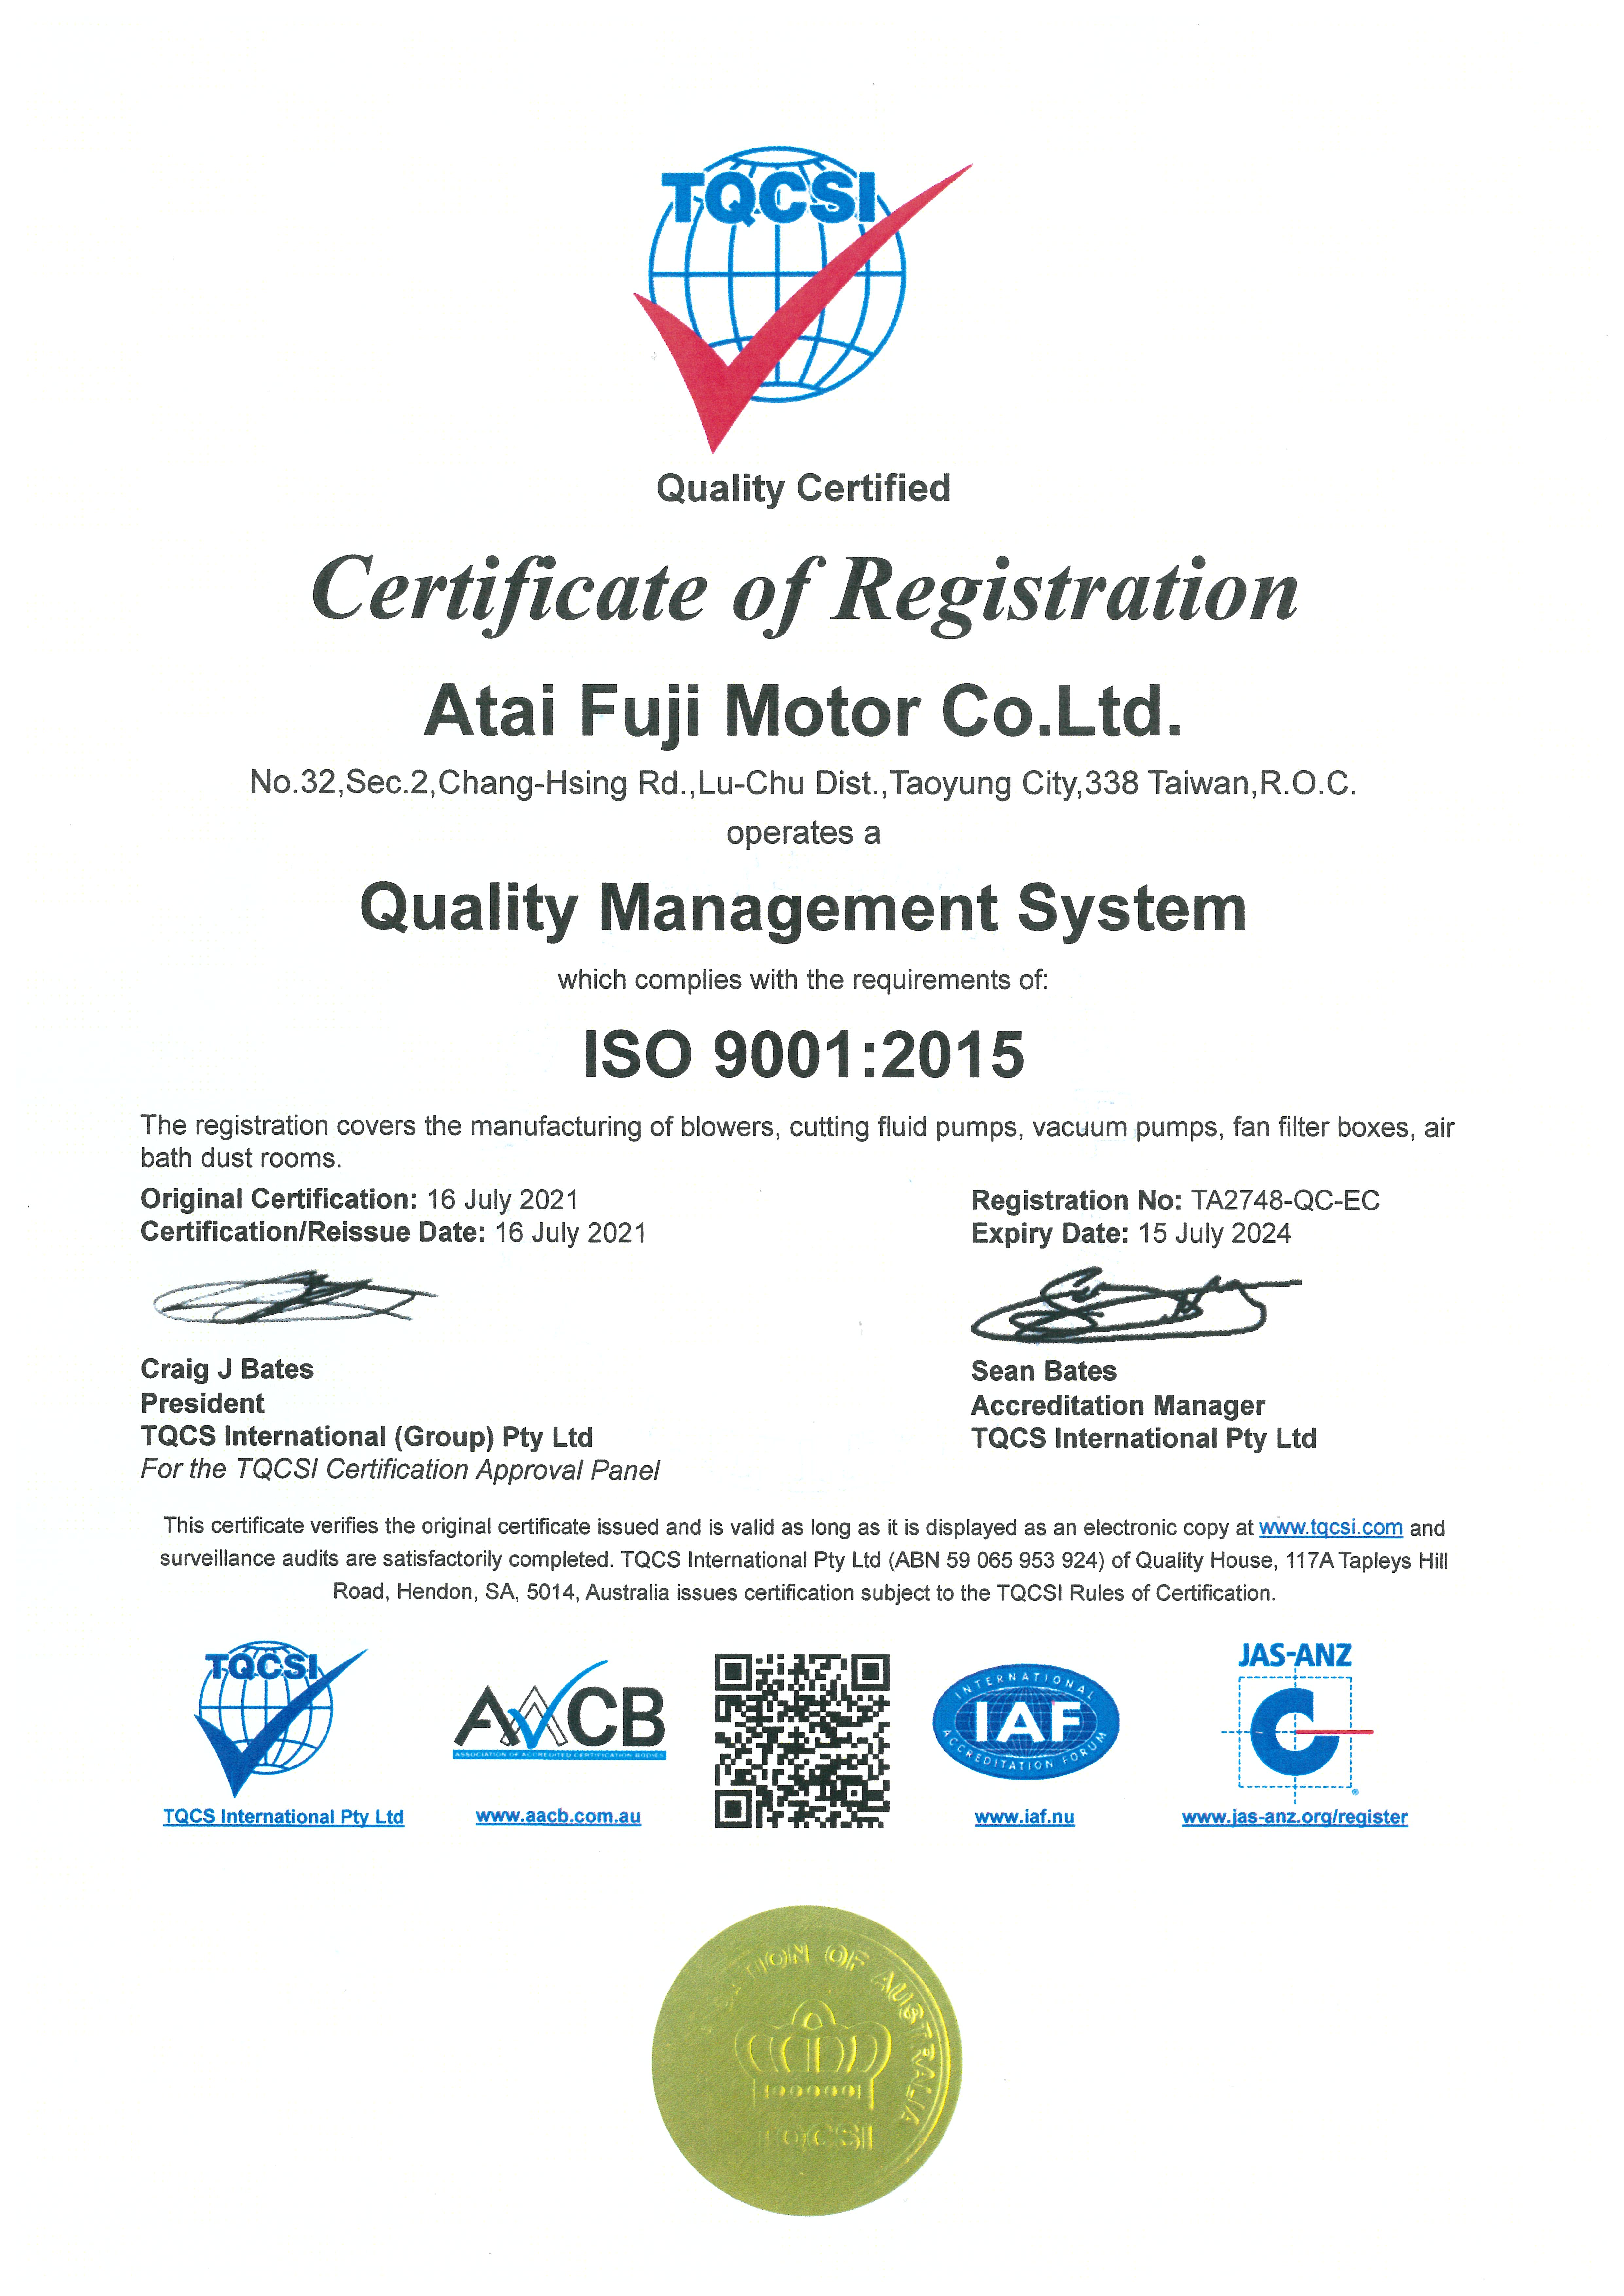 ISO 9001_2015品質管理系統(Quality Management Systems)